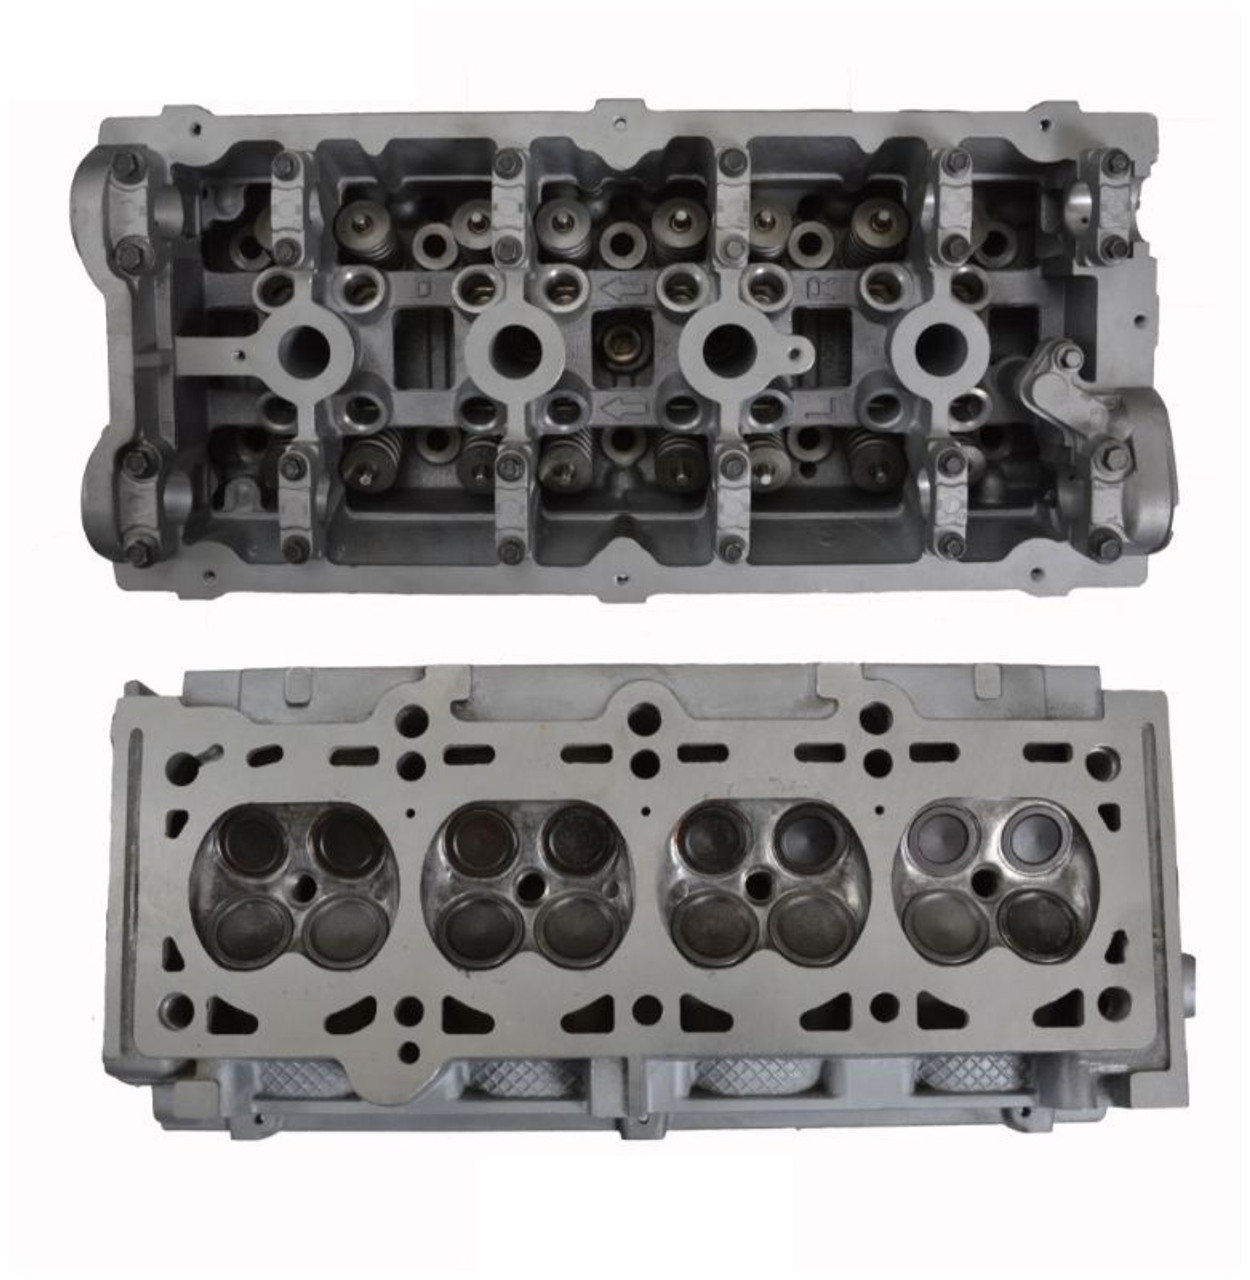 2001 Dodge Stratus 2.4L Engine Cylinder Head Assembly CH1074R -5